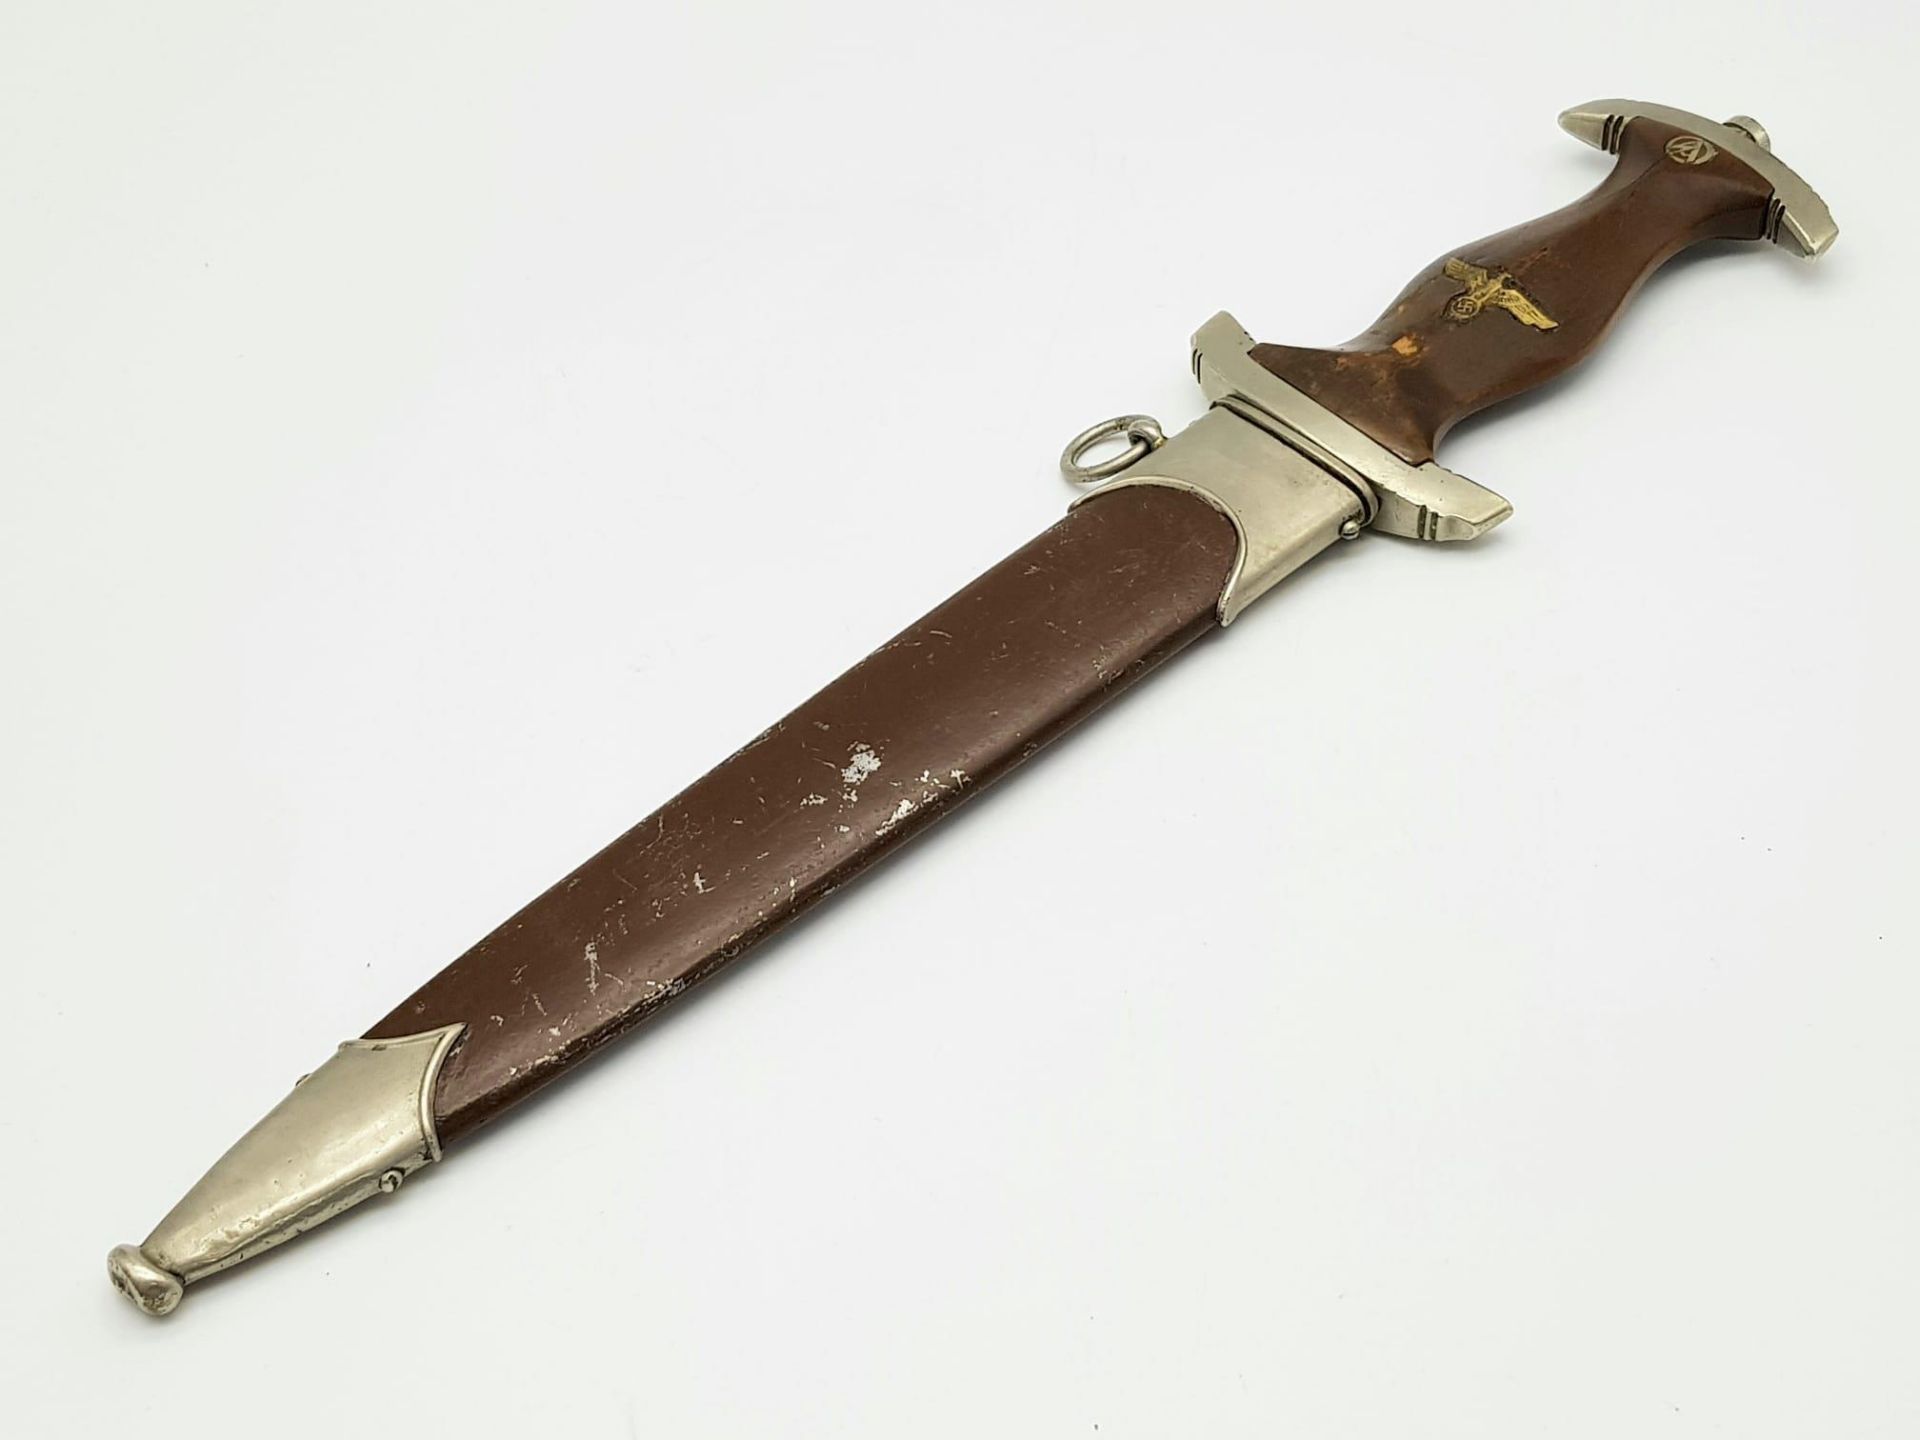 A 3rd Reich SA Dagger with Rare 1935 Makers Mark C. Eppenstien-Sohn. Gruppe Marked Wm for - Image 6 of 7